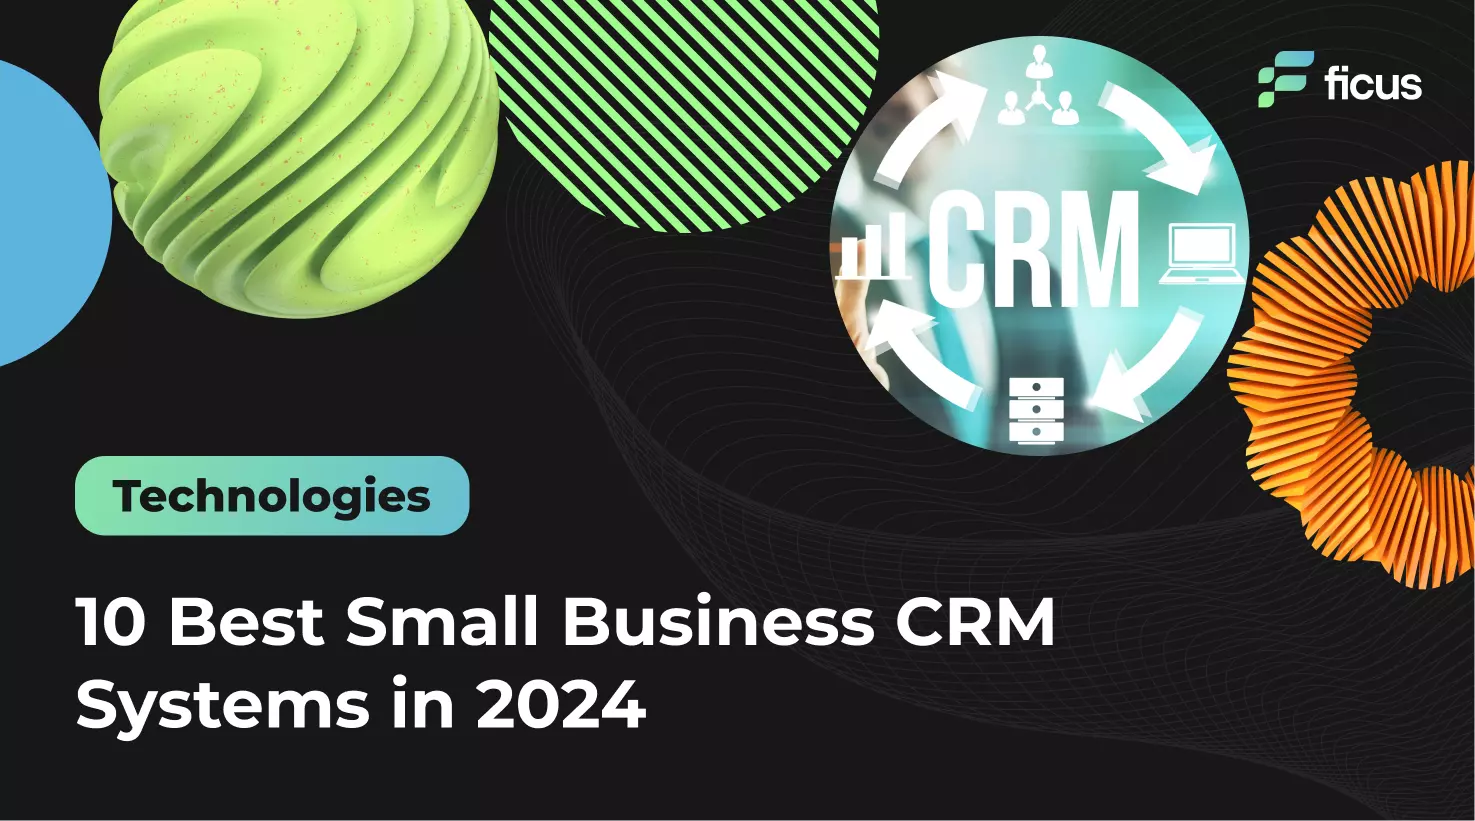 10-Best-Small-Business-CRM-Systems-in-2024